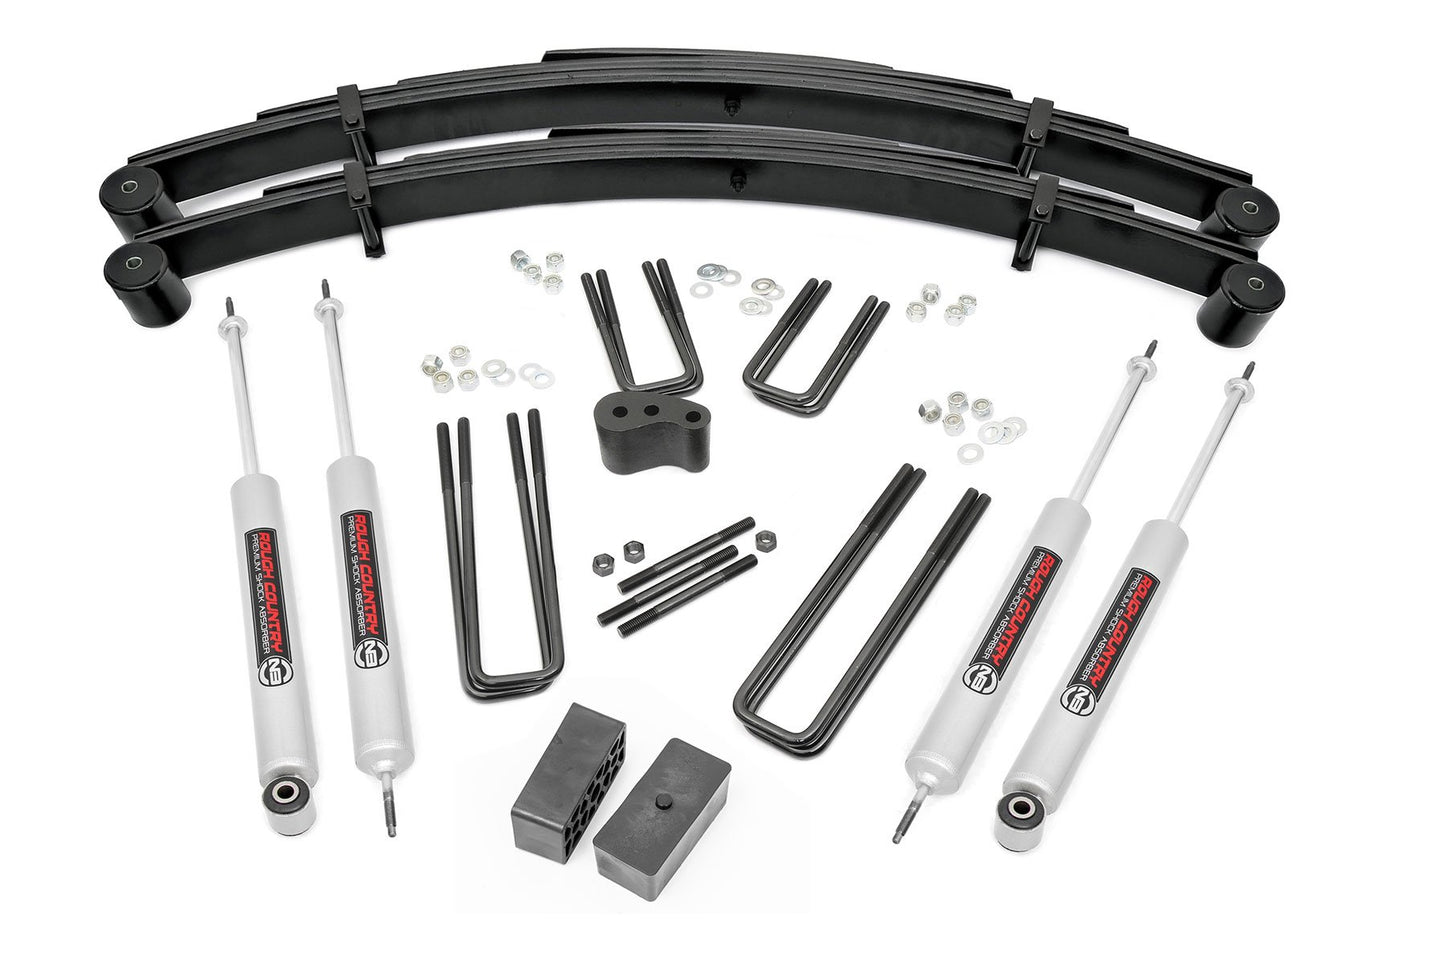 Rough Country 4 Inch Lift Kit | Lowboy | Ford F-250 4WD (1977-1979)